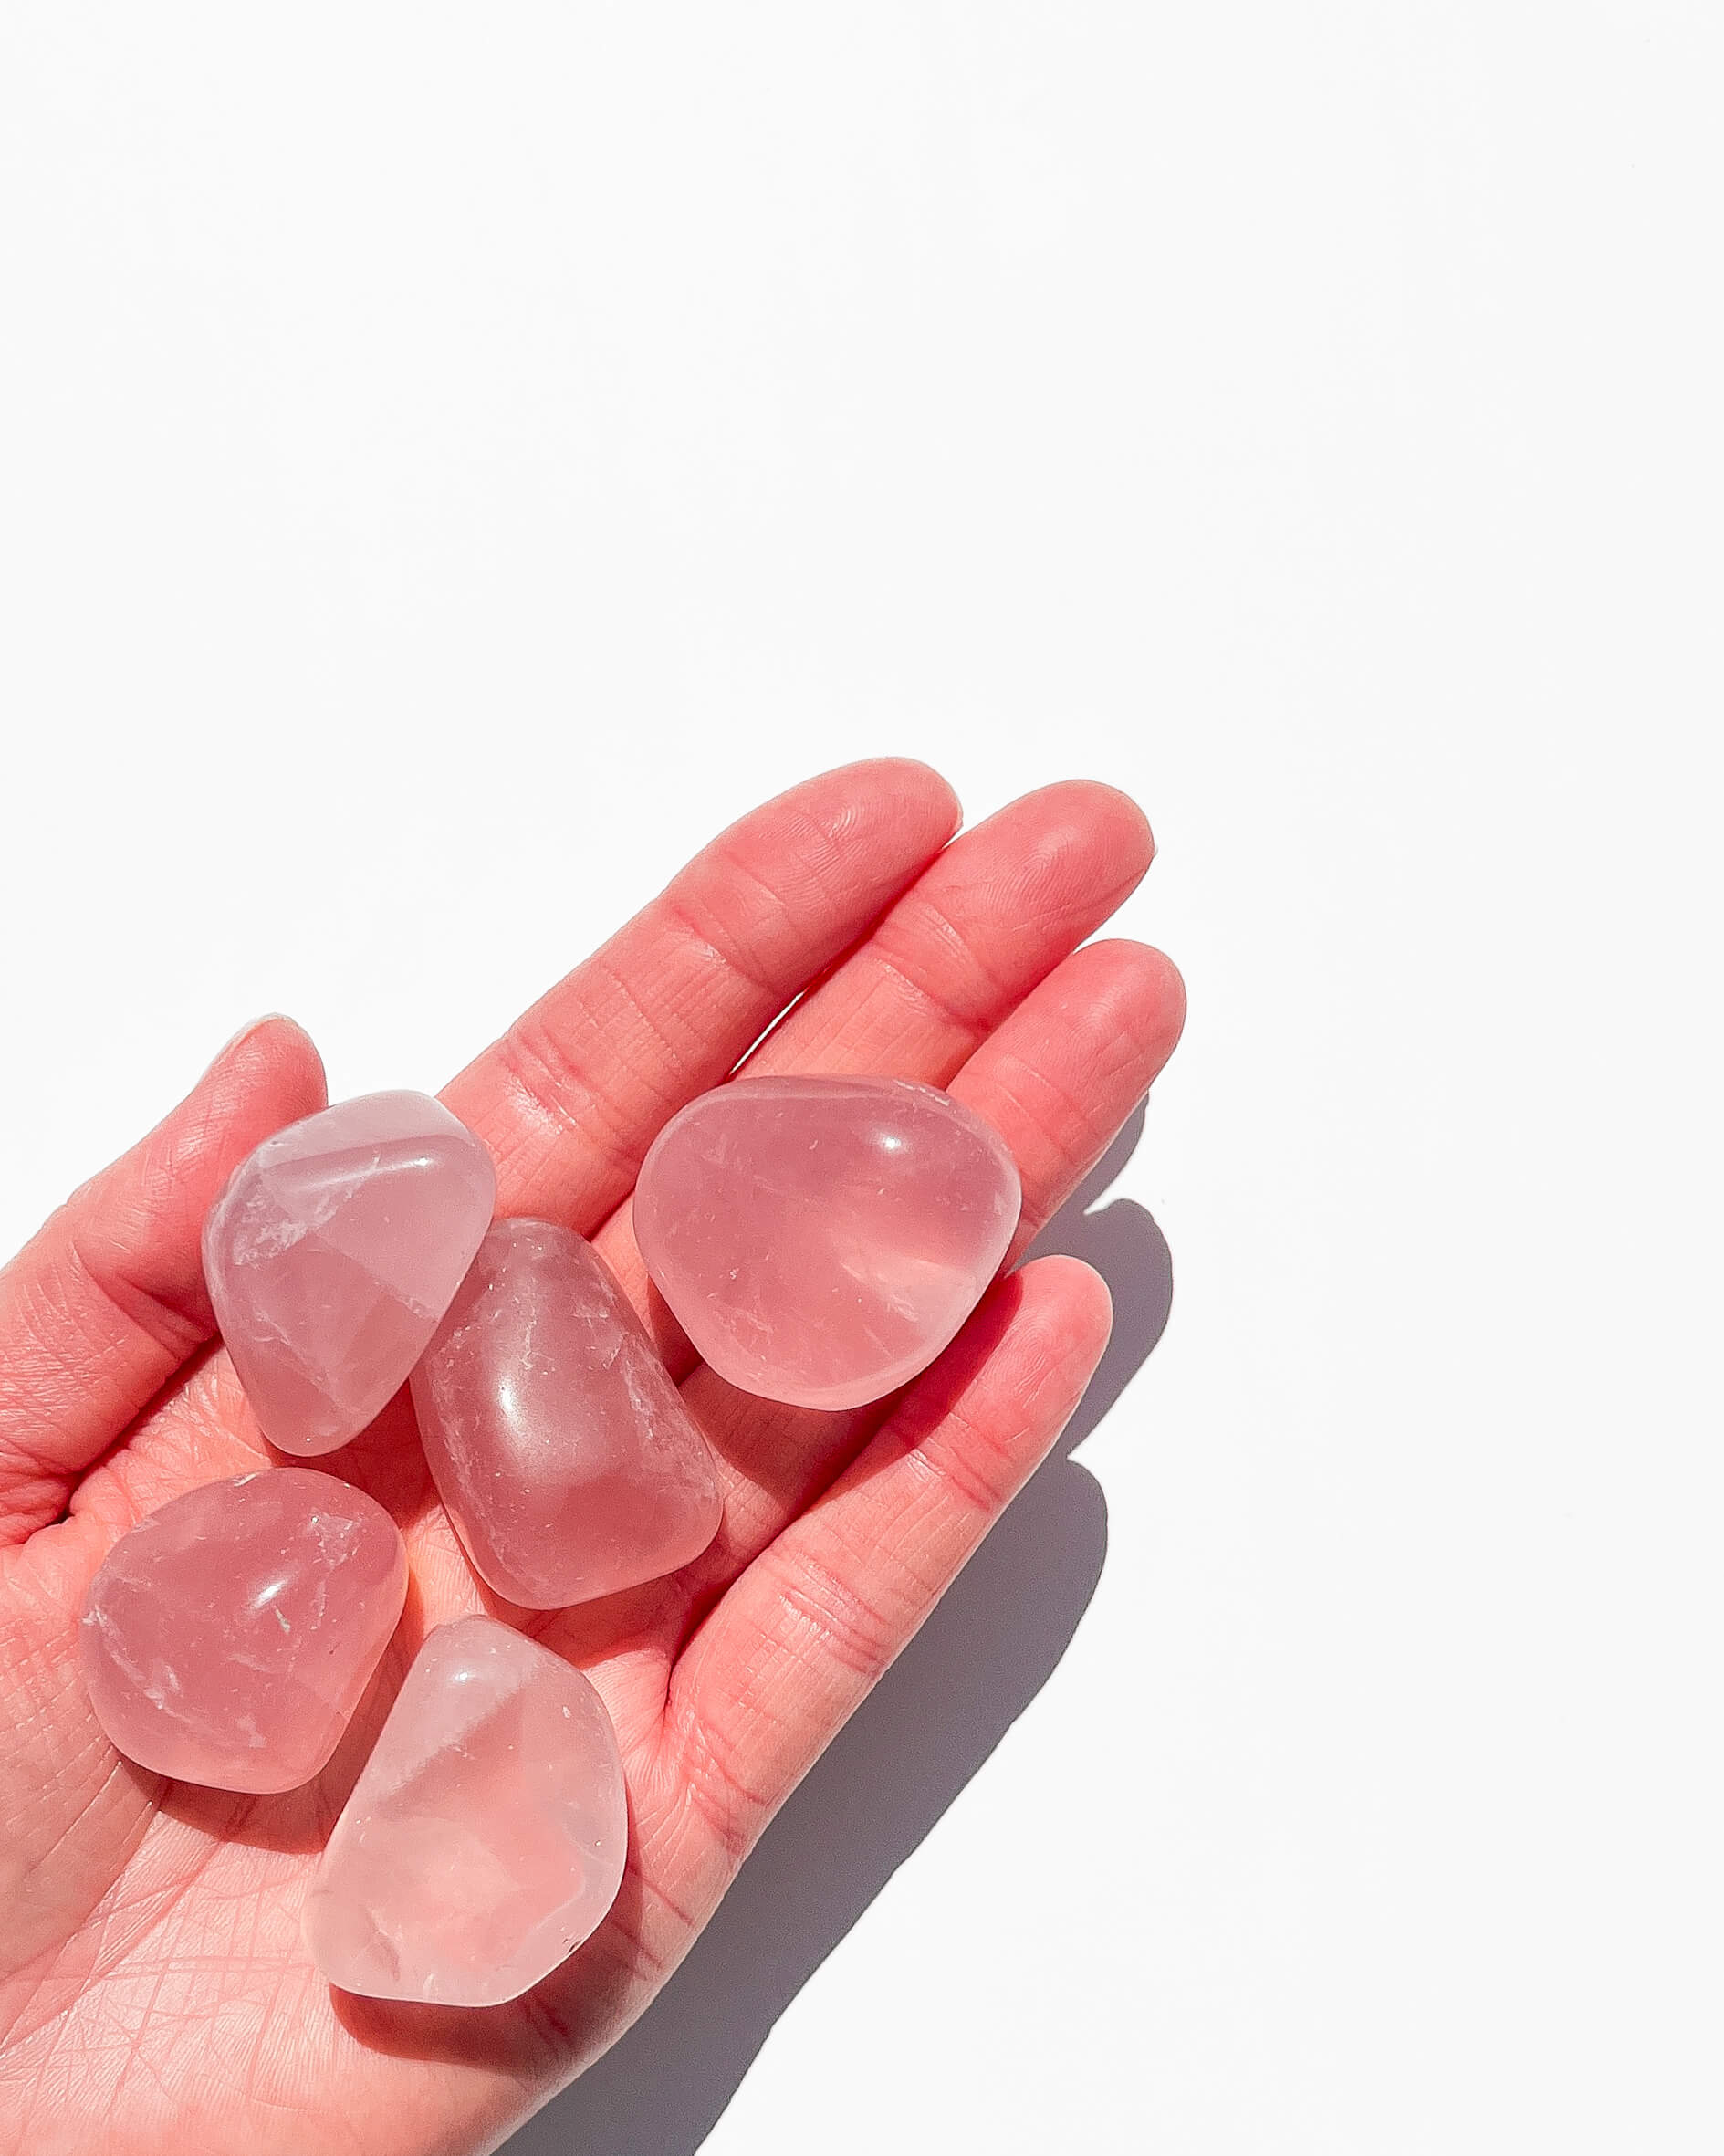 Shop the Best Selection of Pink Crystals at The Crystal Company